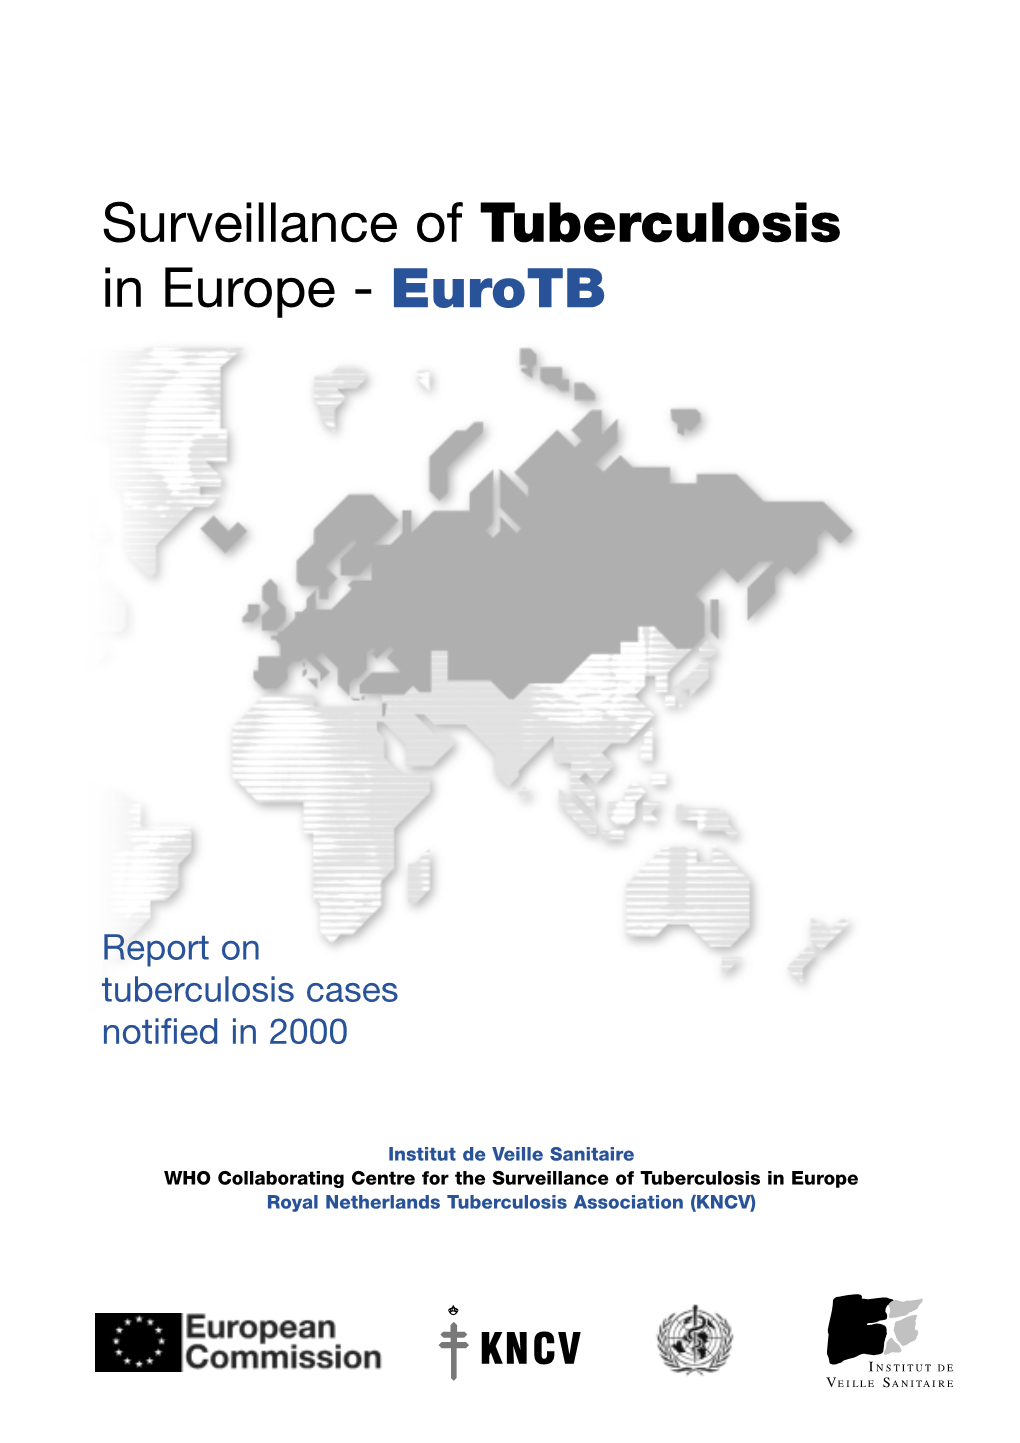 Surveillance of Tuberculosis in Europe - Eurotb